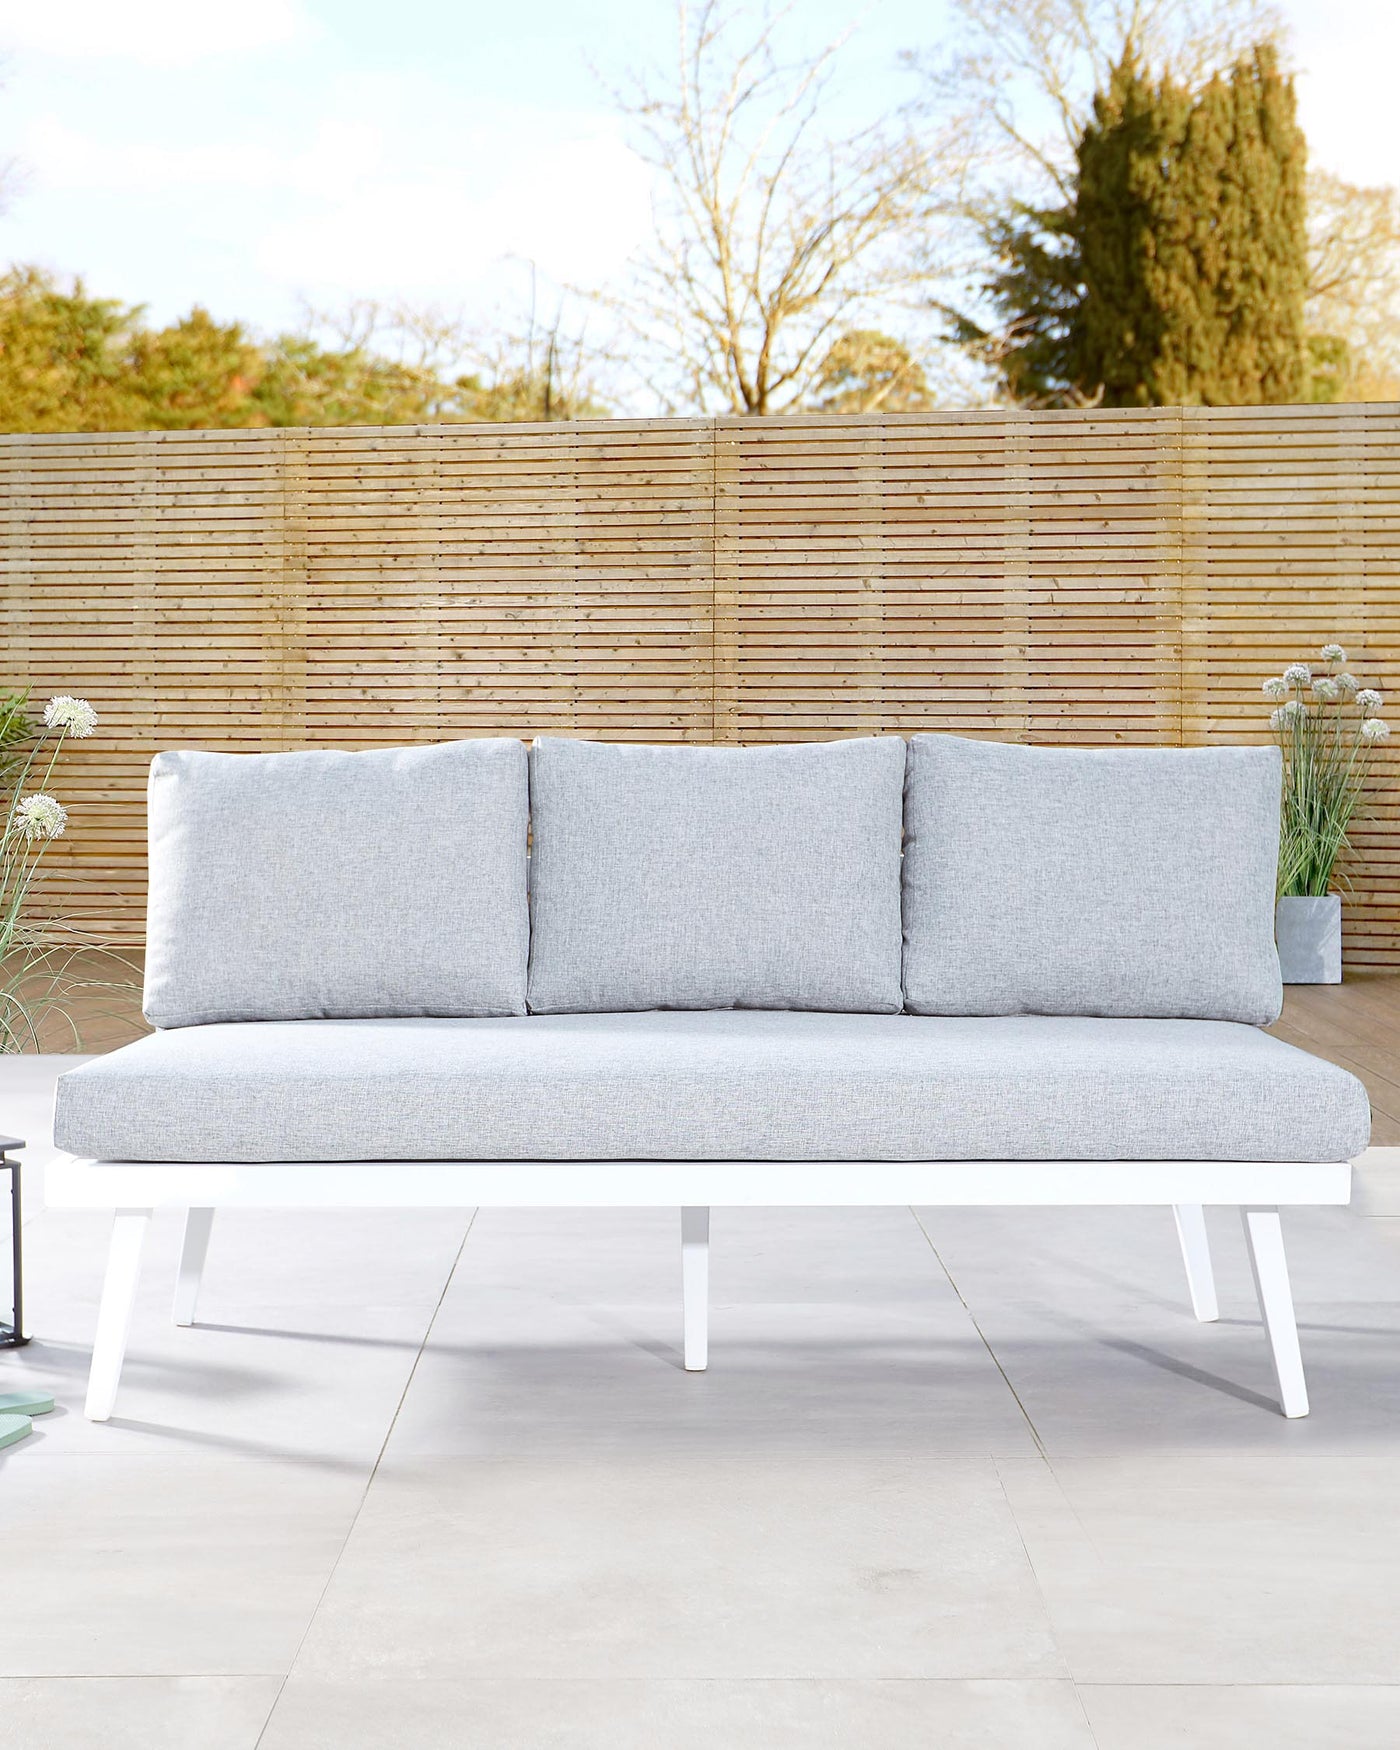 Modern outdoor three-seater sofa with a sleek white metal frame and light grey cushions.